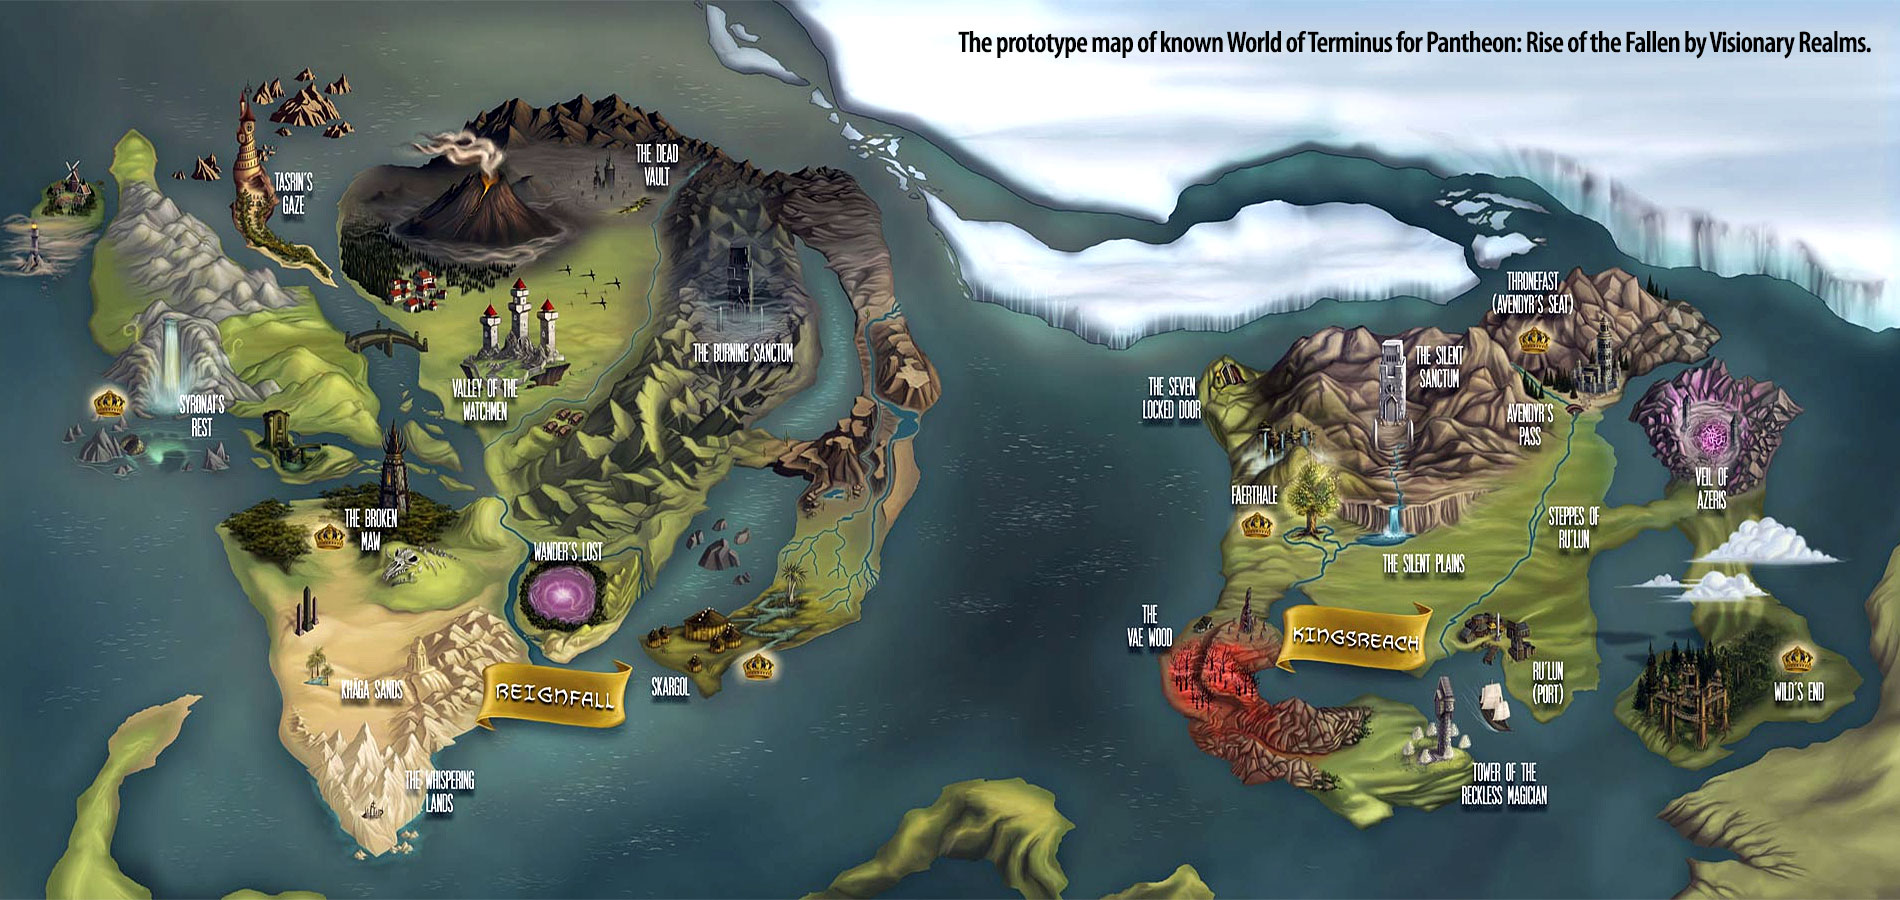 The prototype map of known world of Terminus for Pantheon: Rise of the Fallen by Visionary Realms.